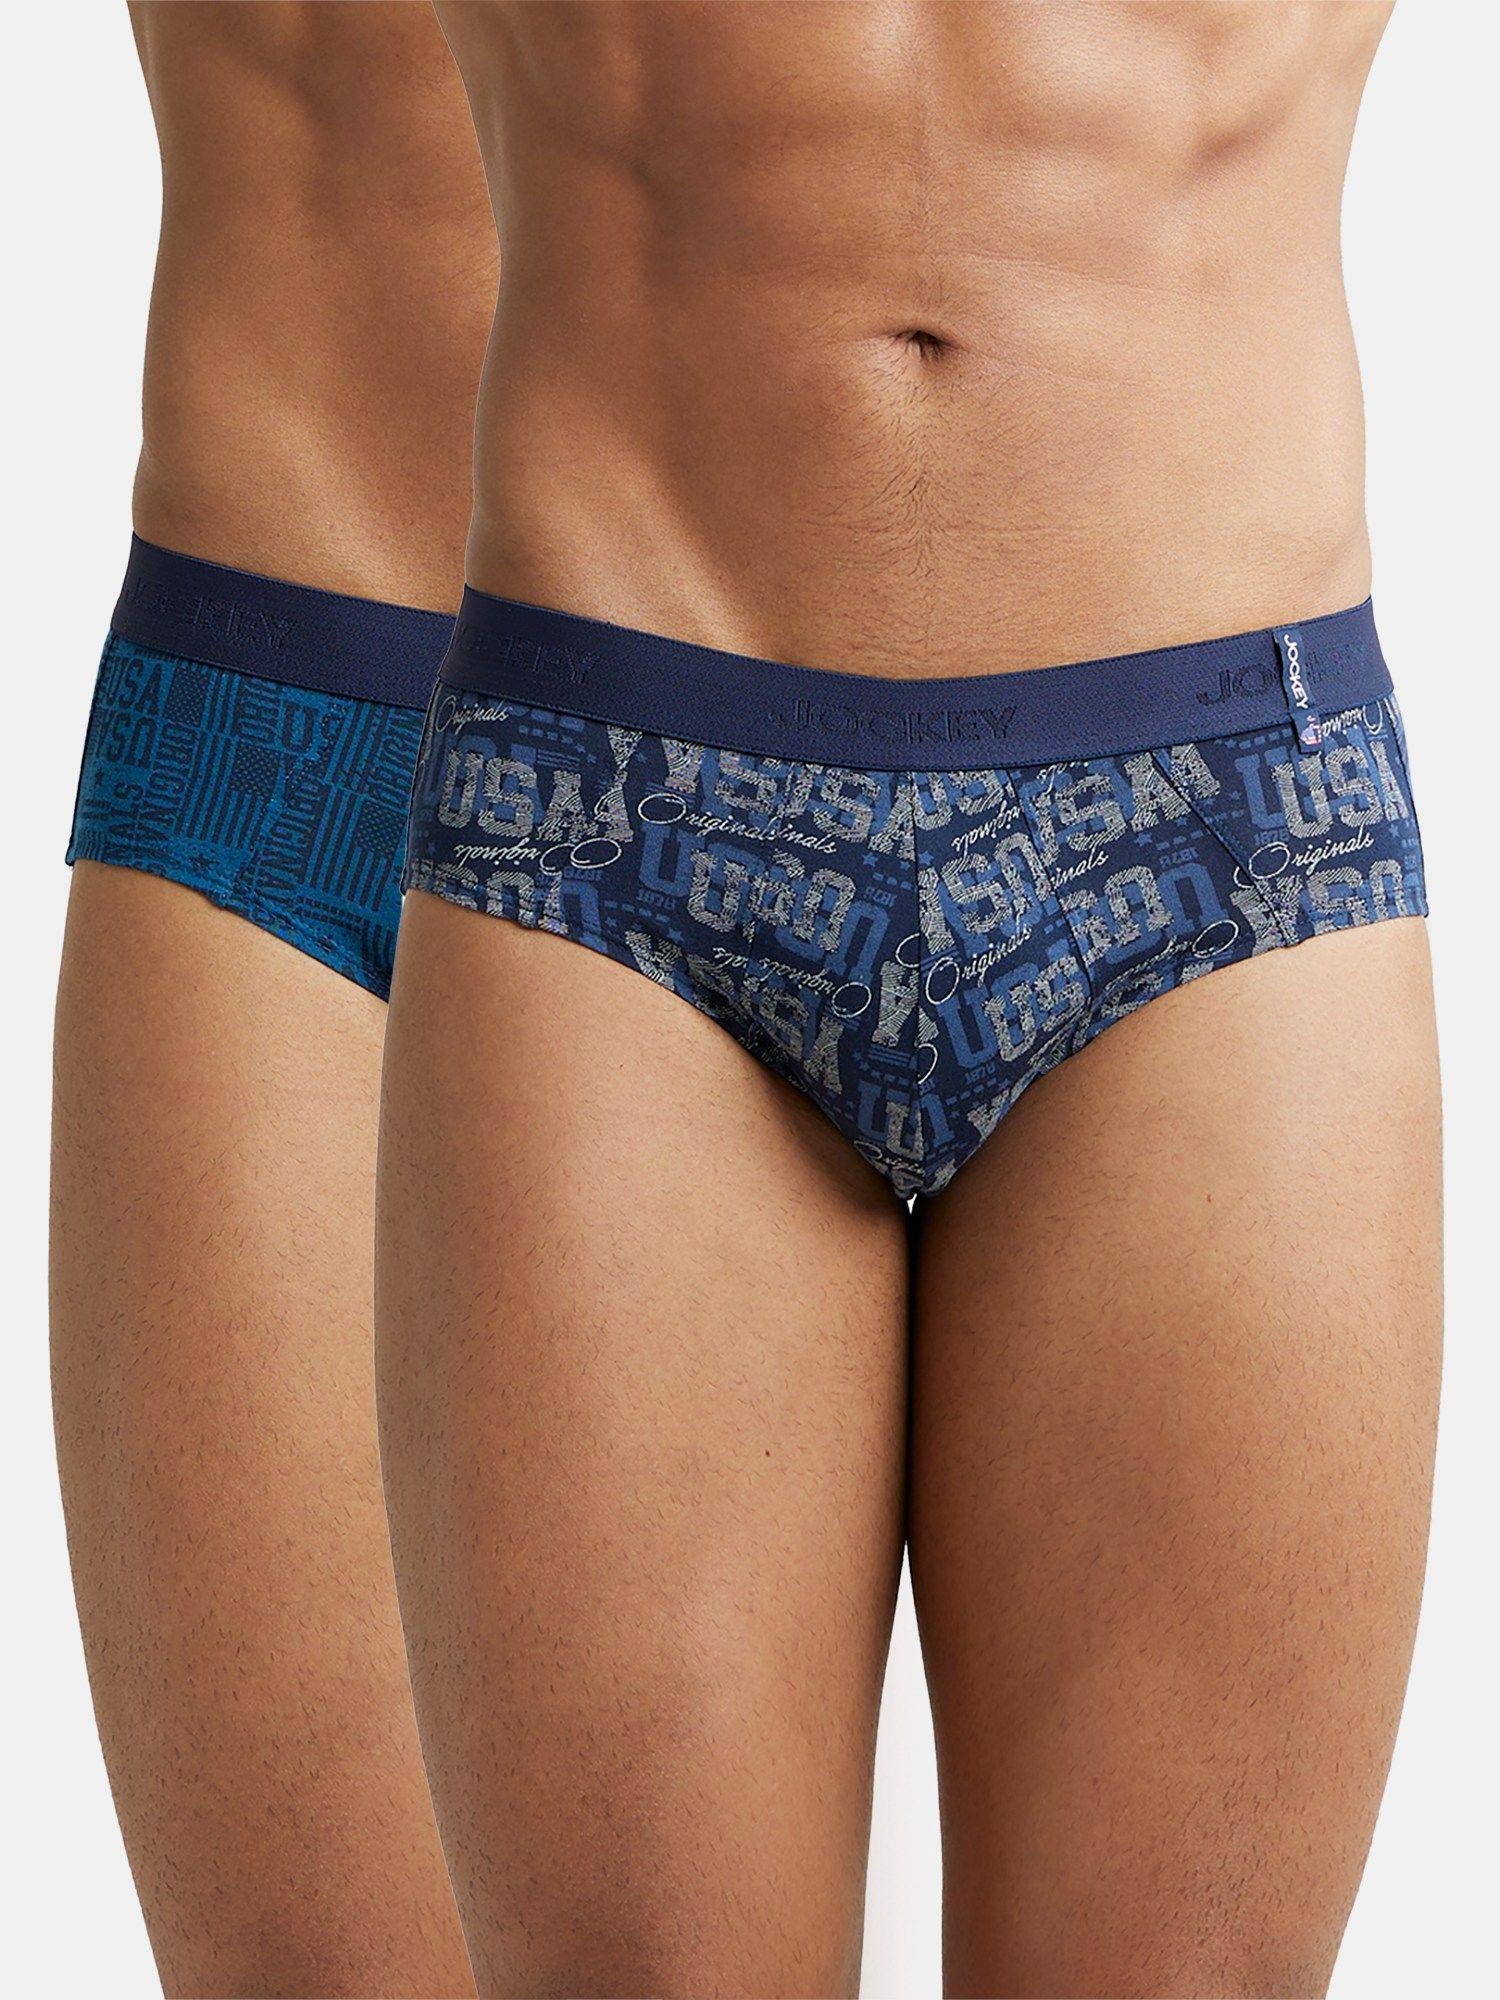 US52 Men Cotton Brief with Ultrasoft Waistband - Multi Color (Pack of 2)